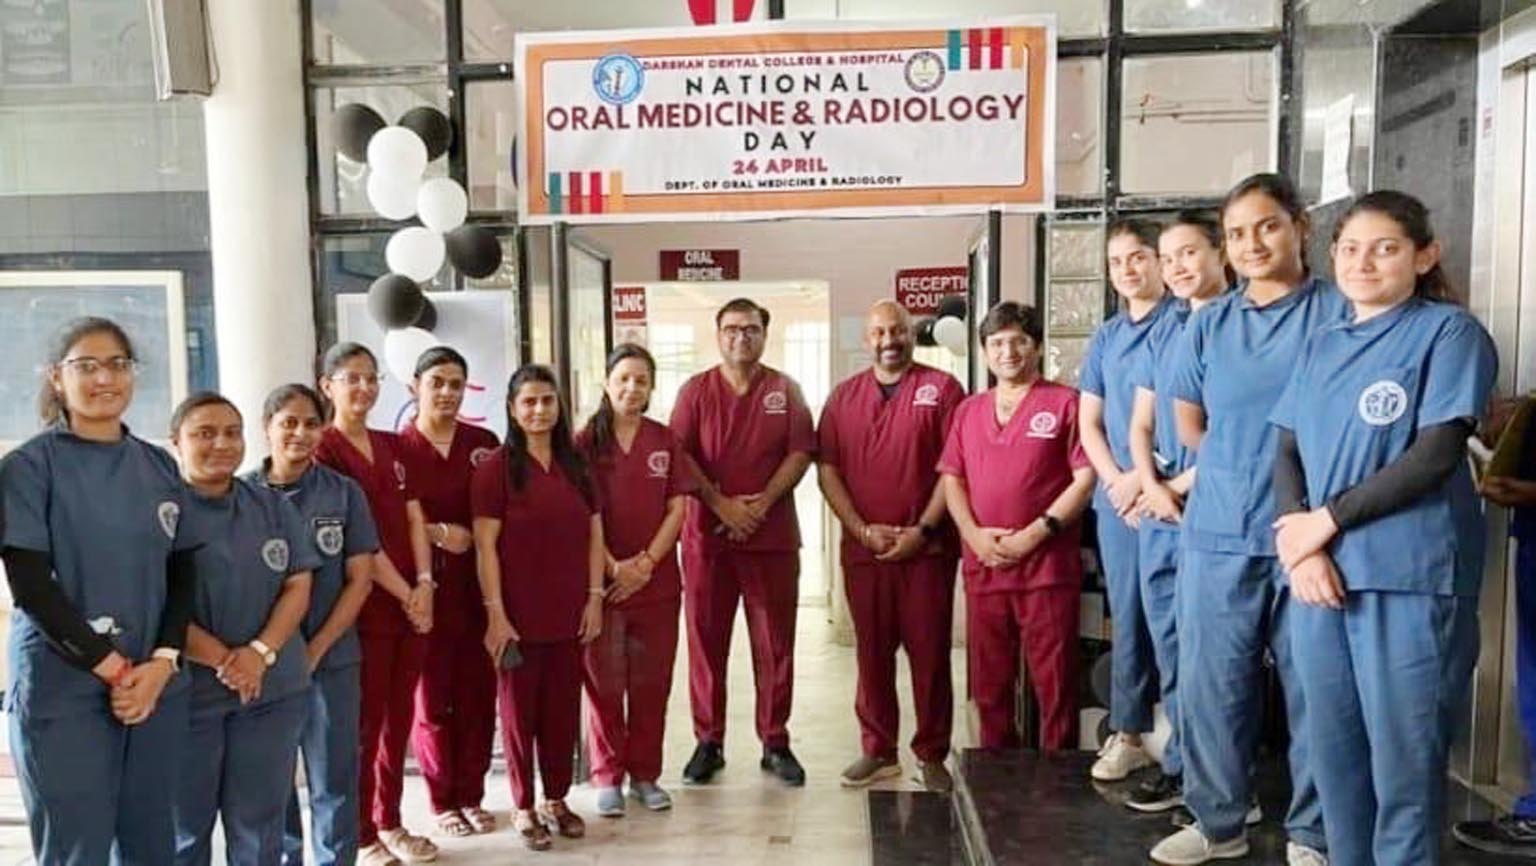 Darshan Dental College and Hospital Celebrates National Oral Medicine and Radiology Day